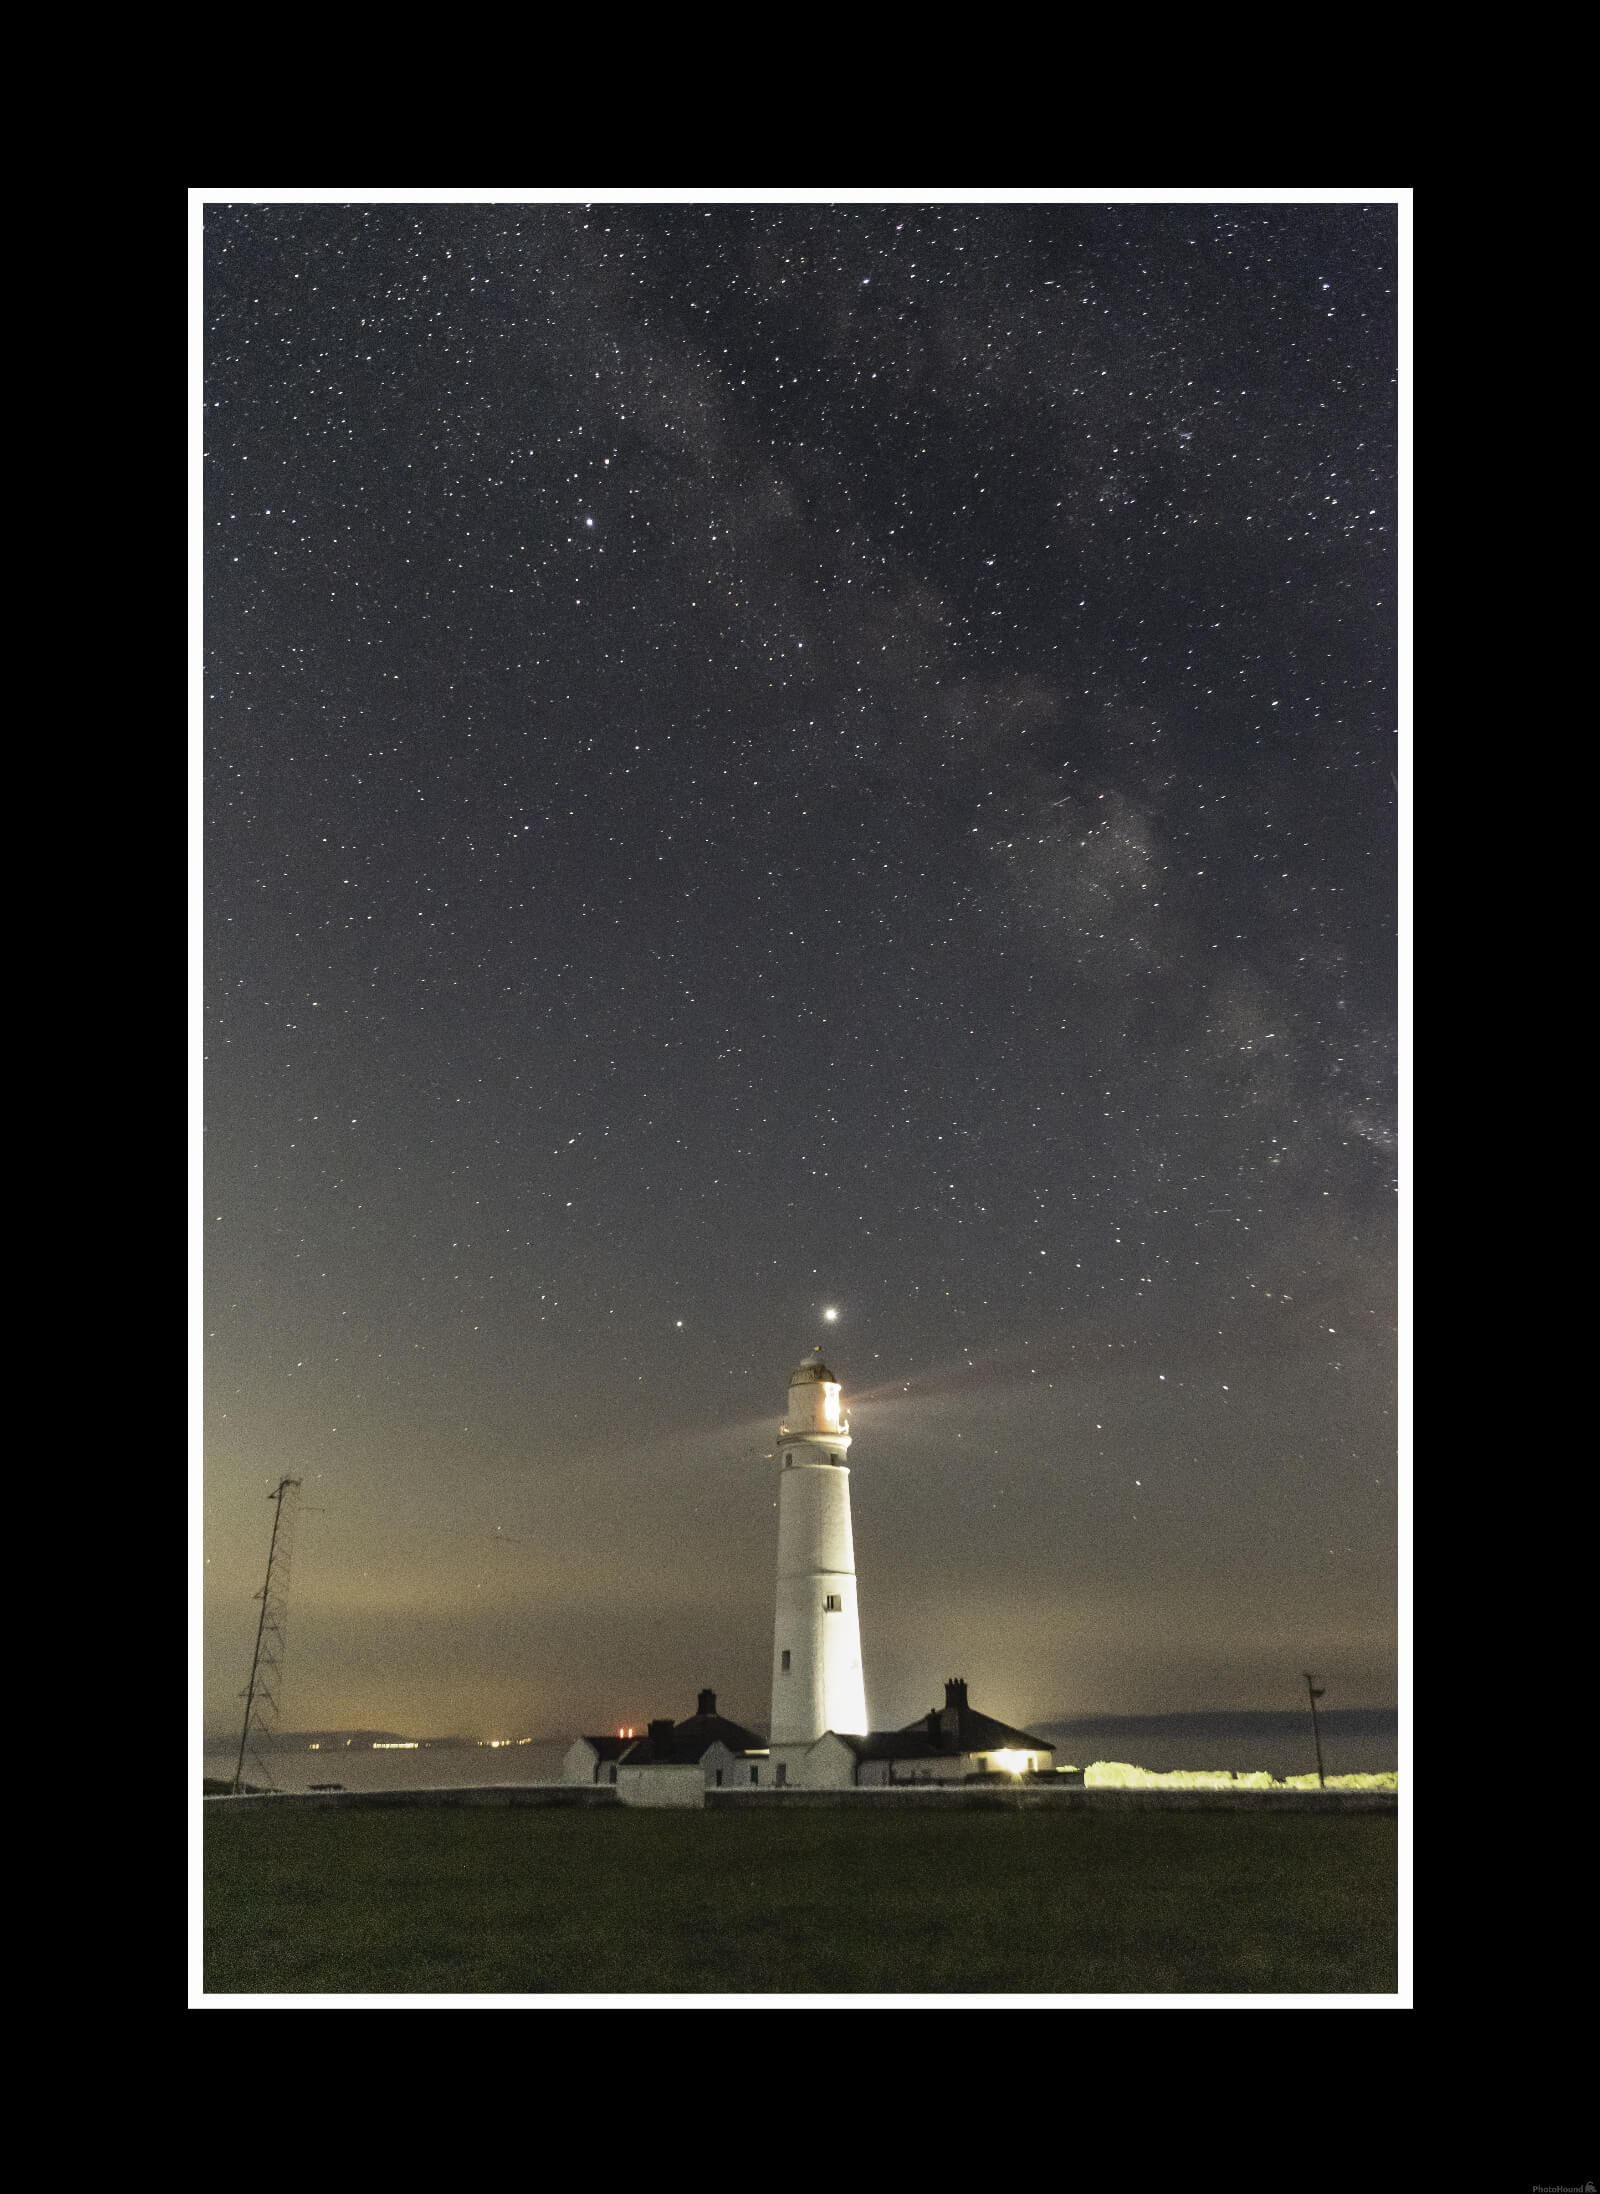 Image of Nash Point Lighthouse, Marcross by Jason Seager